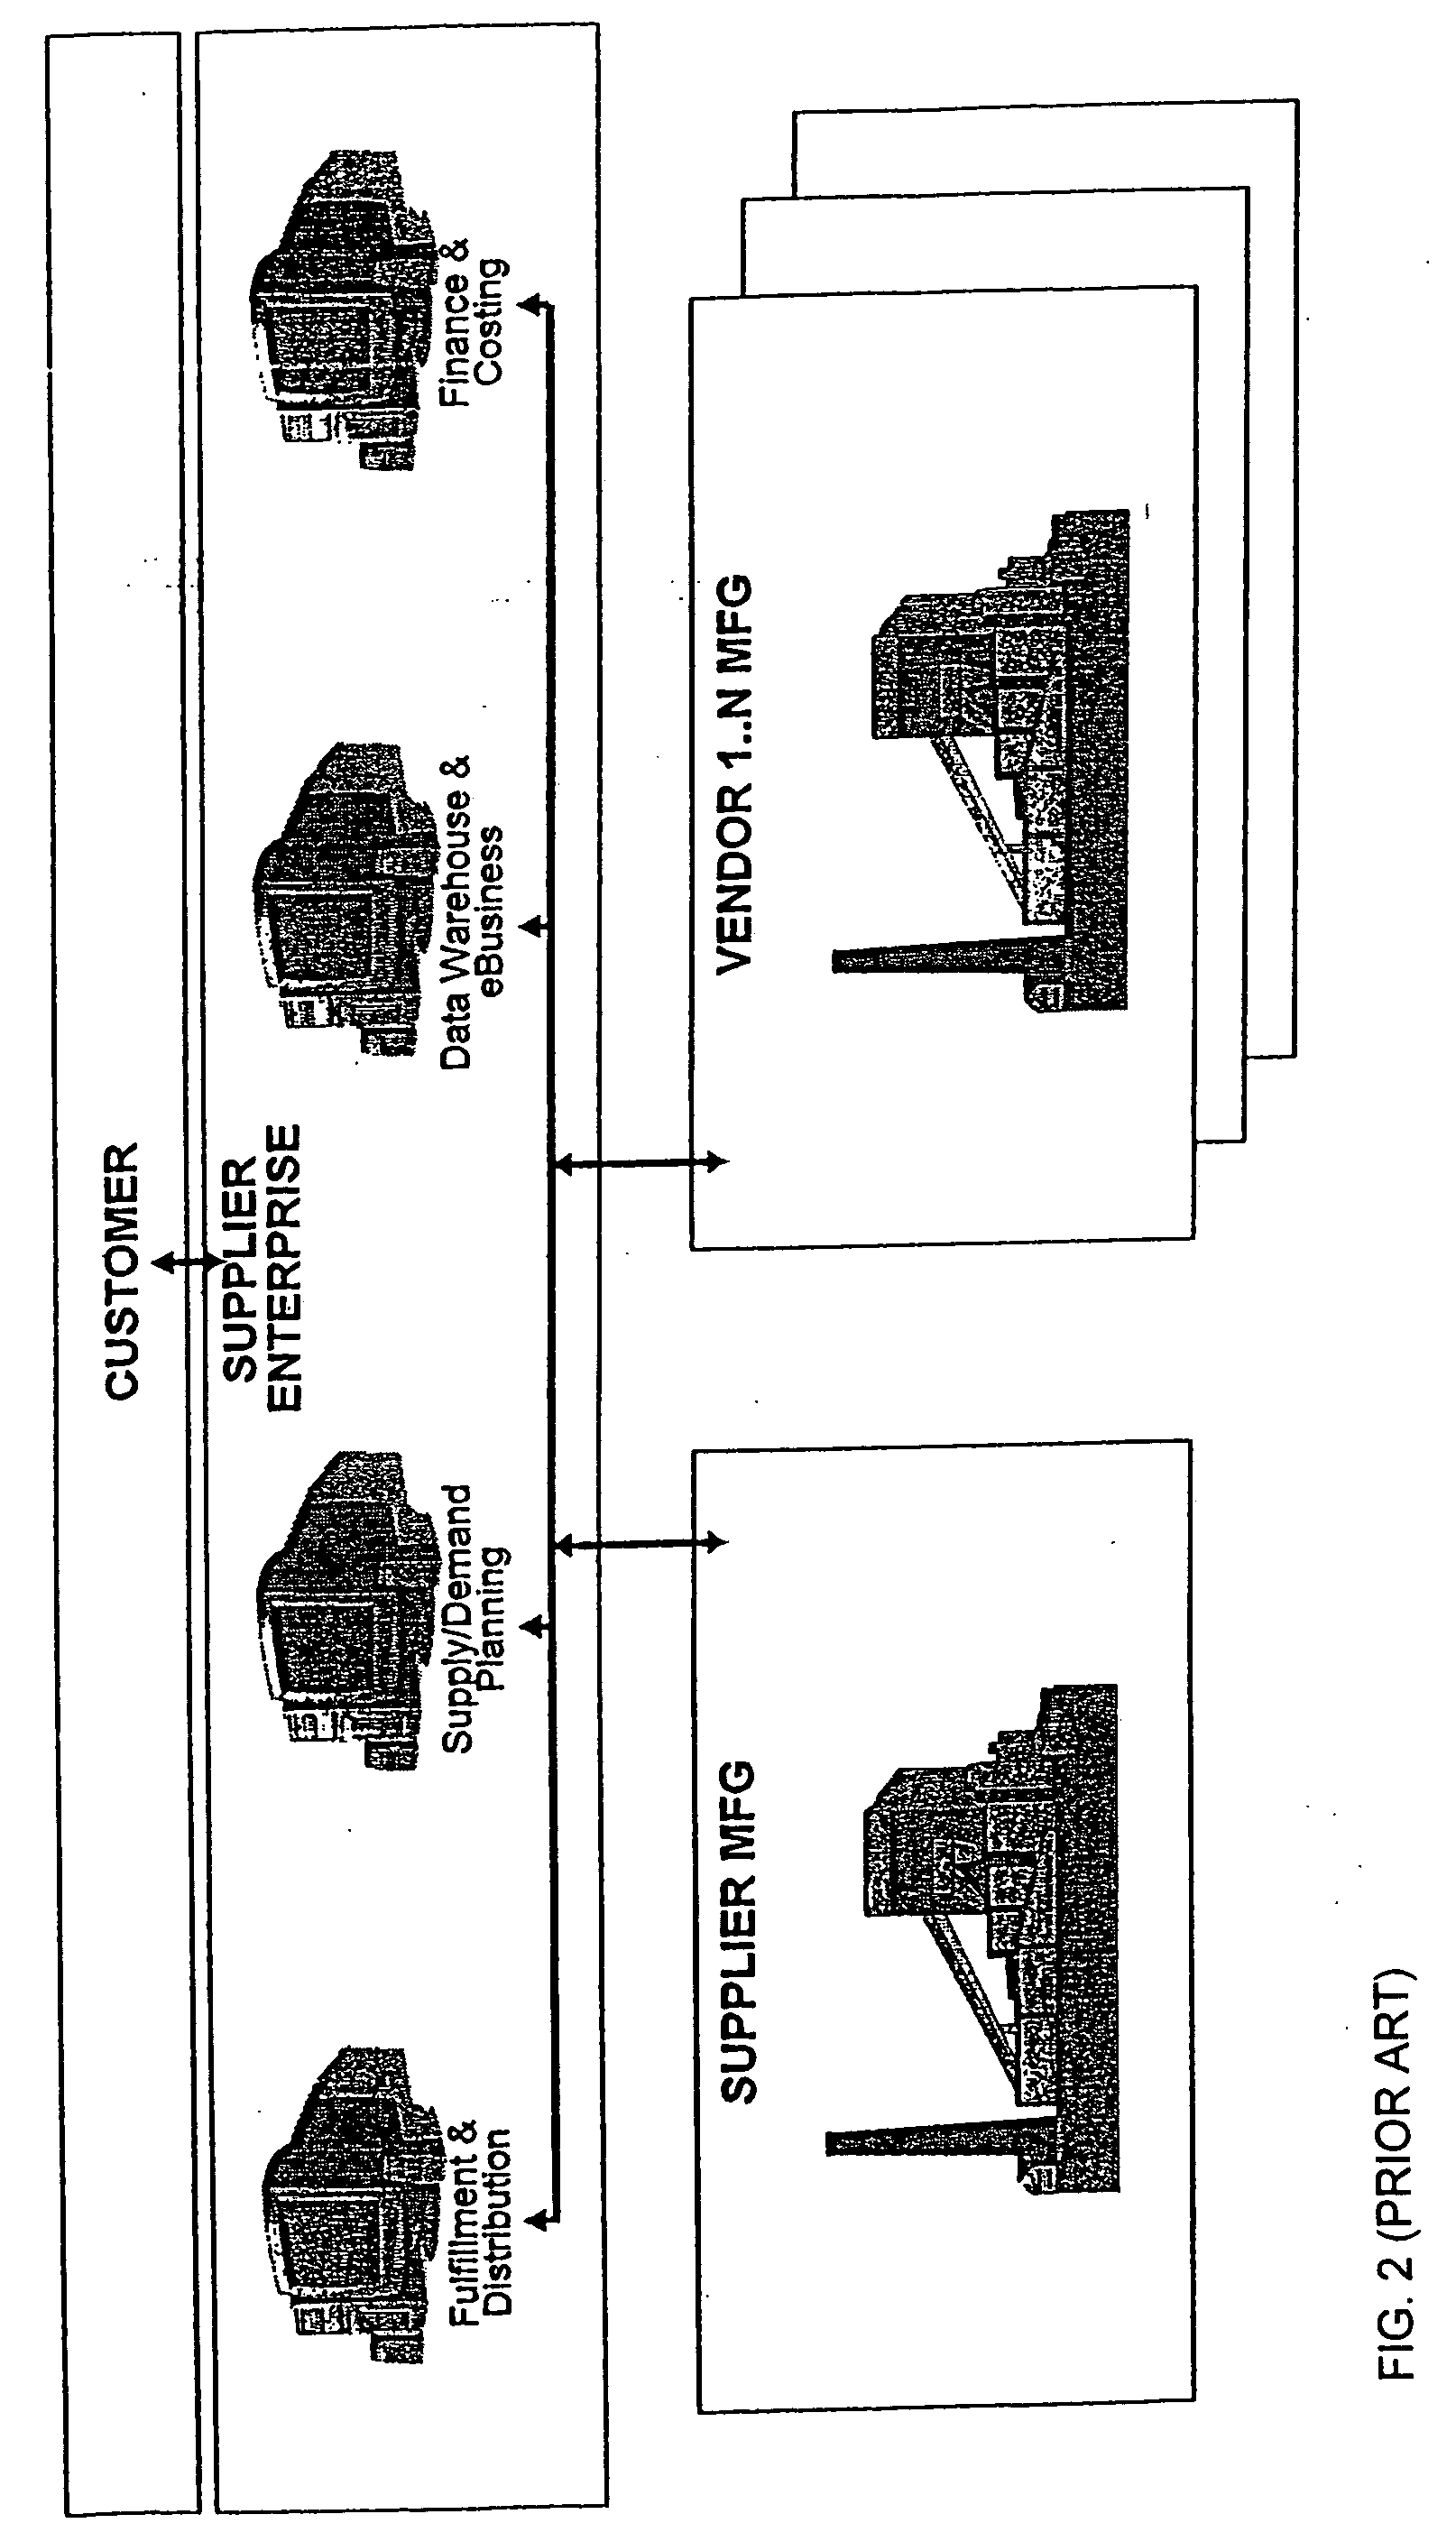 Enterprise factory control method and system